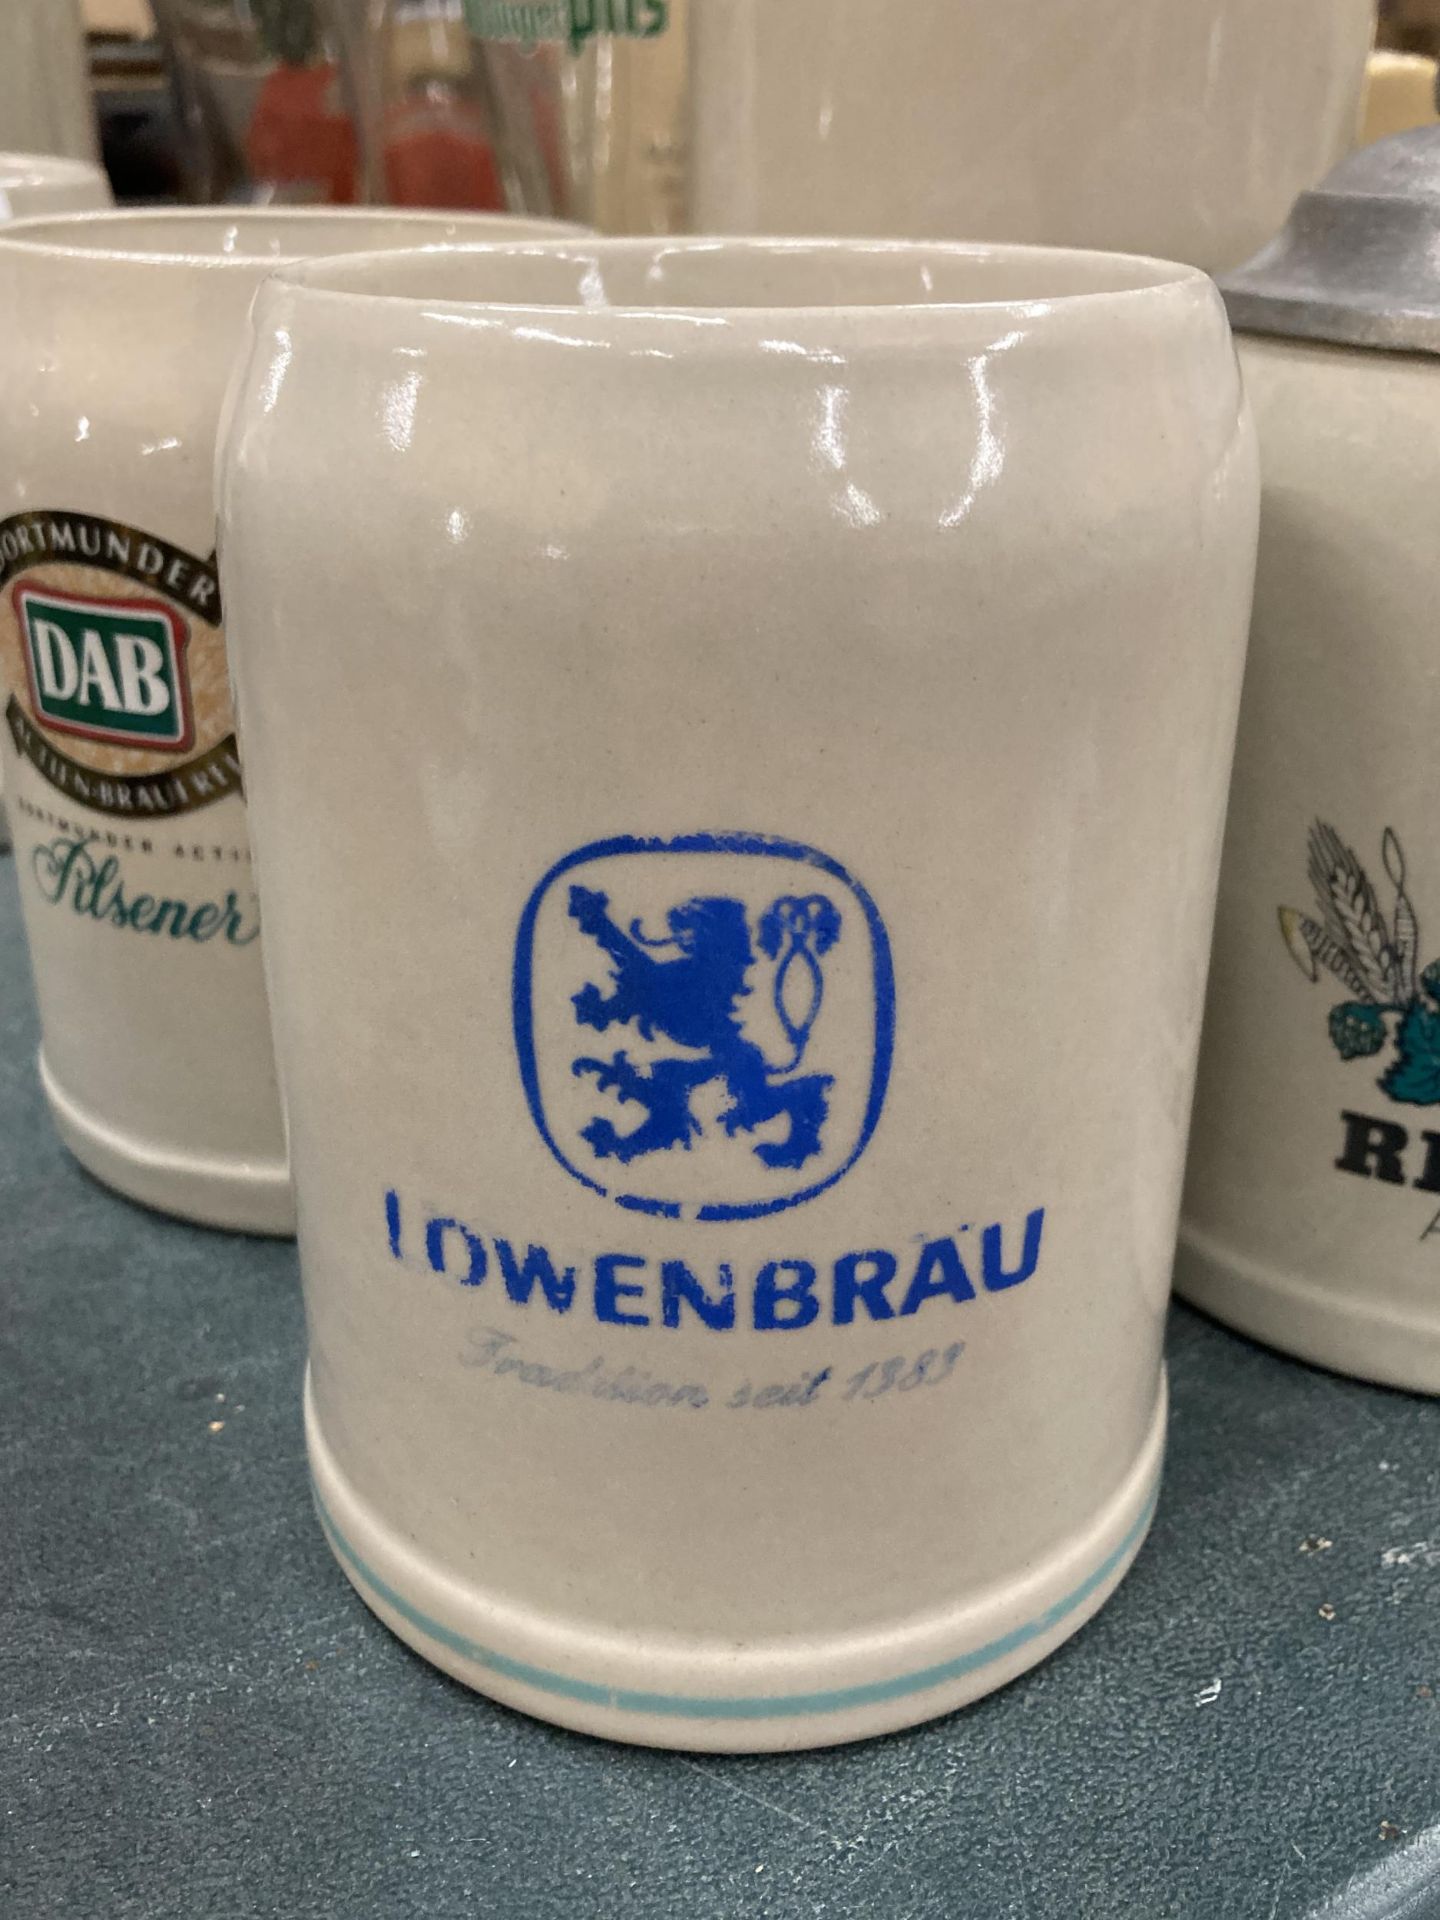 FOUR STONEWARE STEINS TO INCLUDE KUNHLE, DAB, RIEGELE AND LOWENBRAU - Image 3 of 5